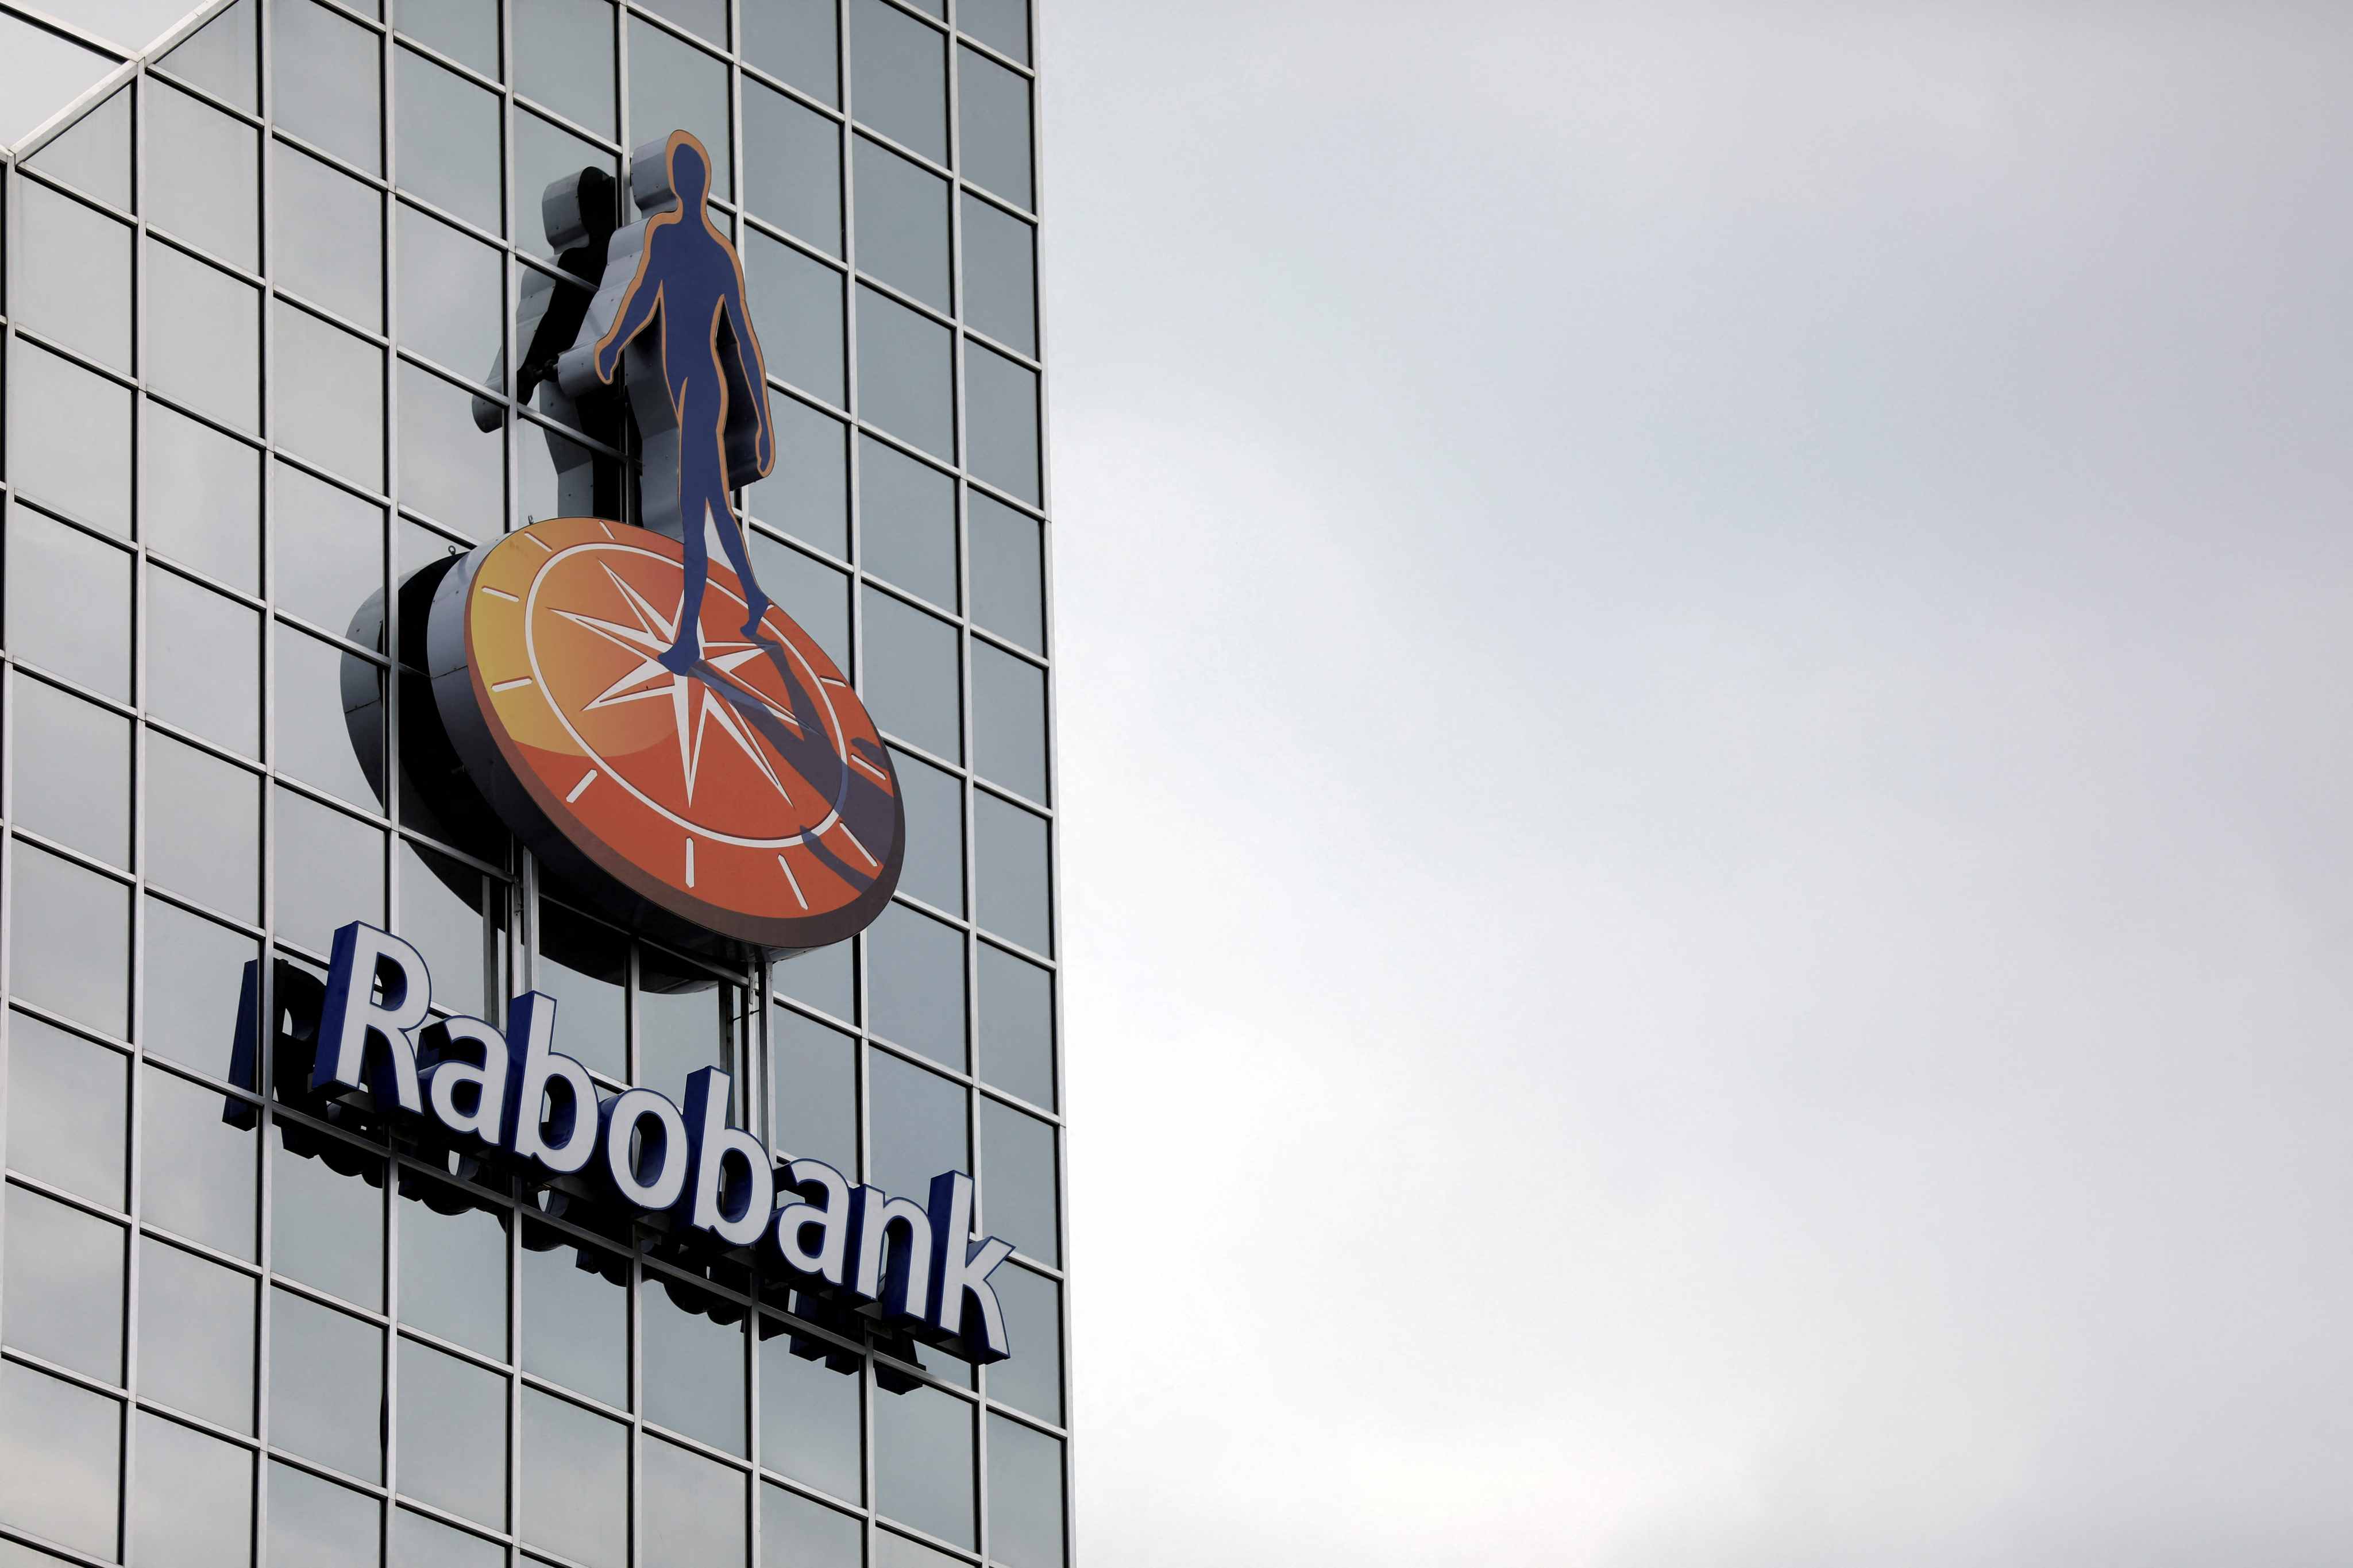 19-facts-about-rabobank